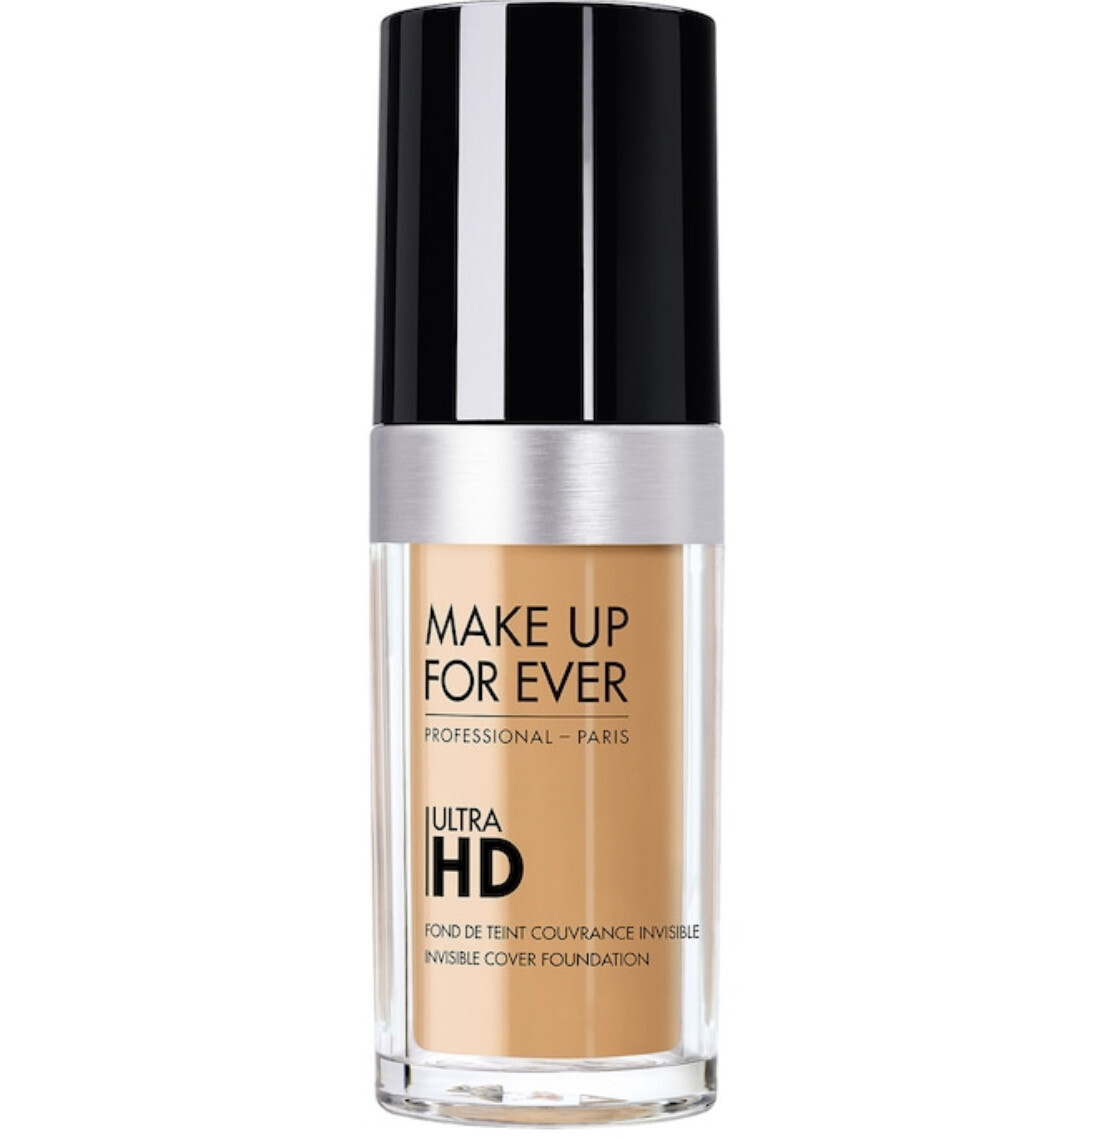 Make Up For Ever - Ultra HD Invisible Cover Foundation | Y375 Golden Sand - for lighter tan skin with golden-peach undertones